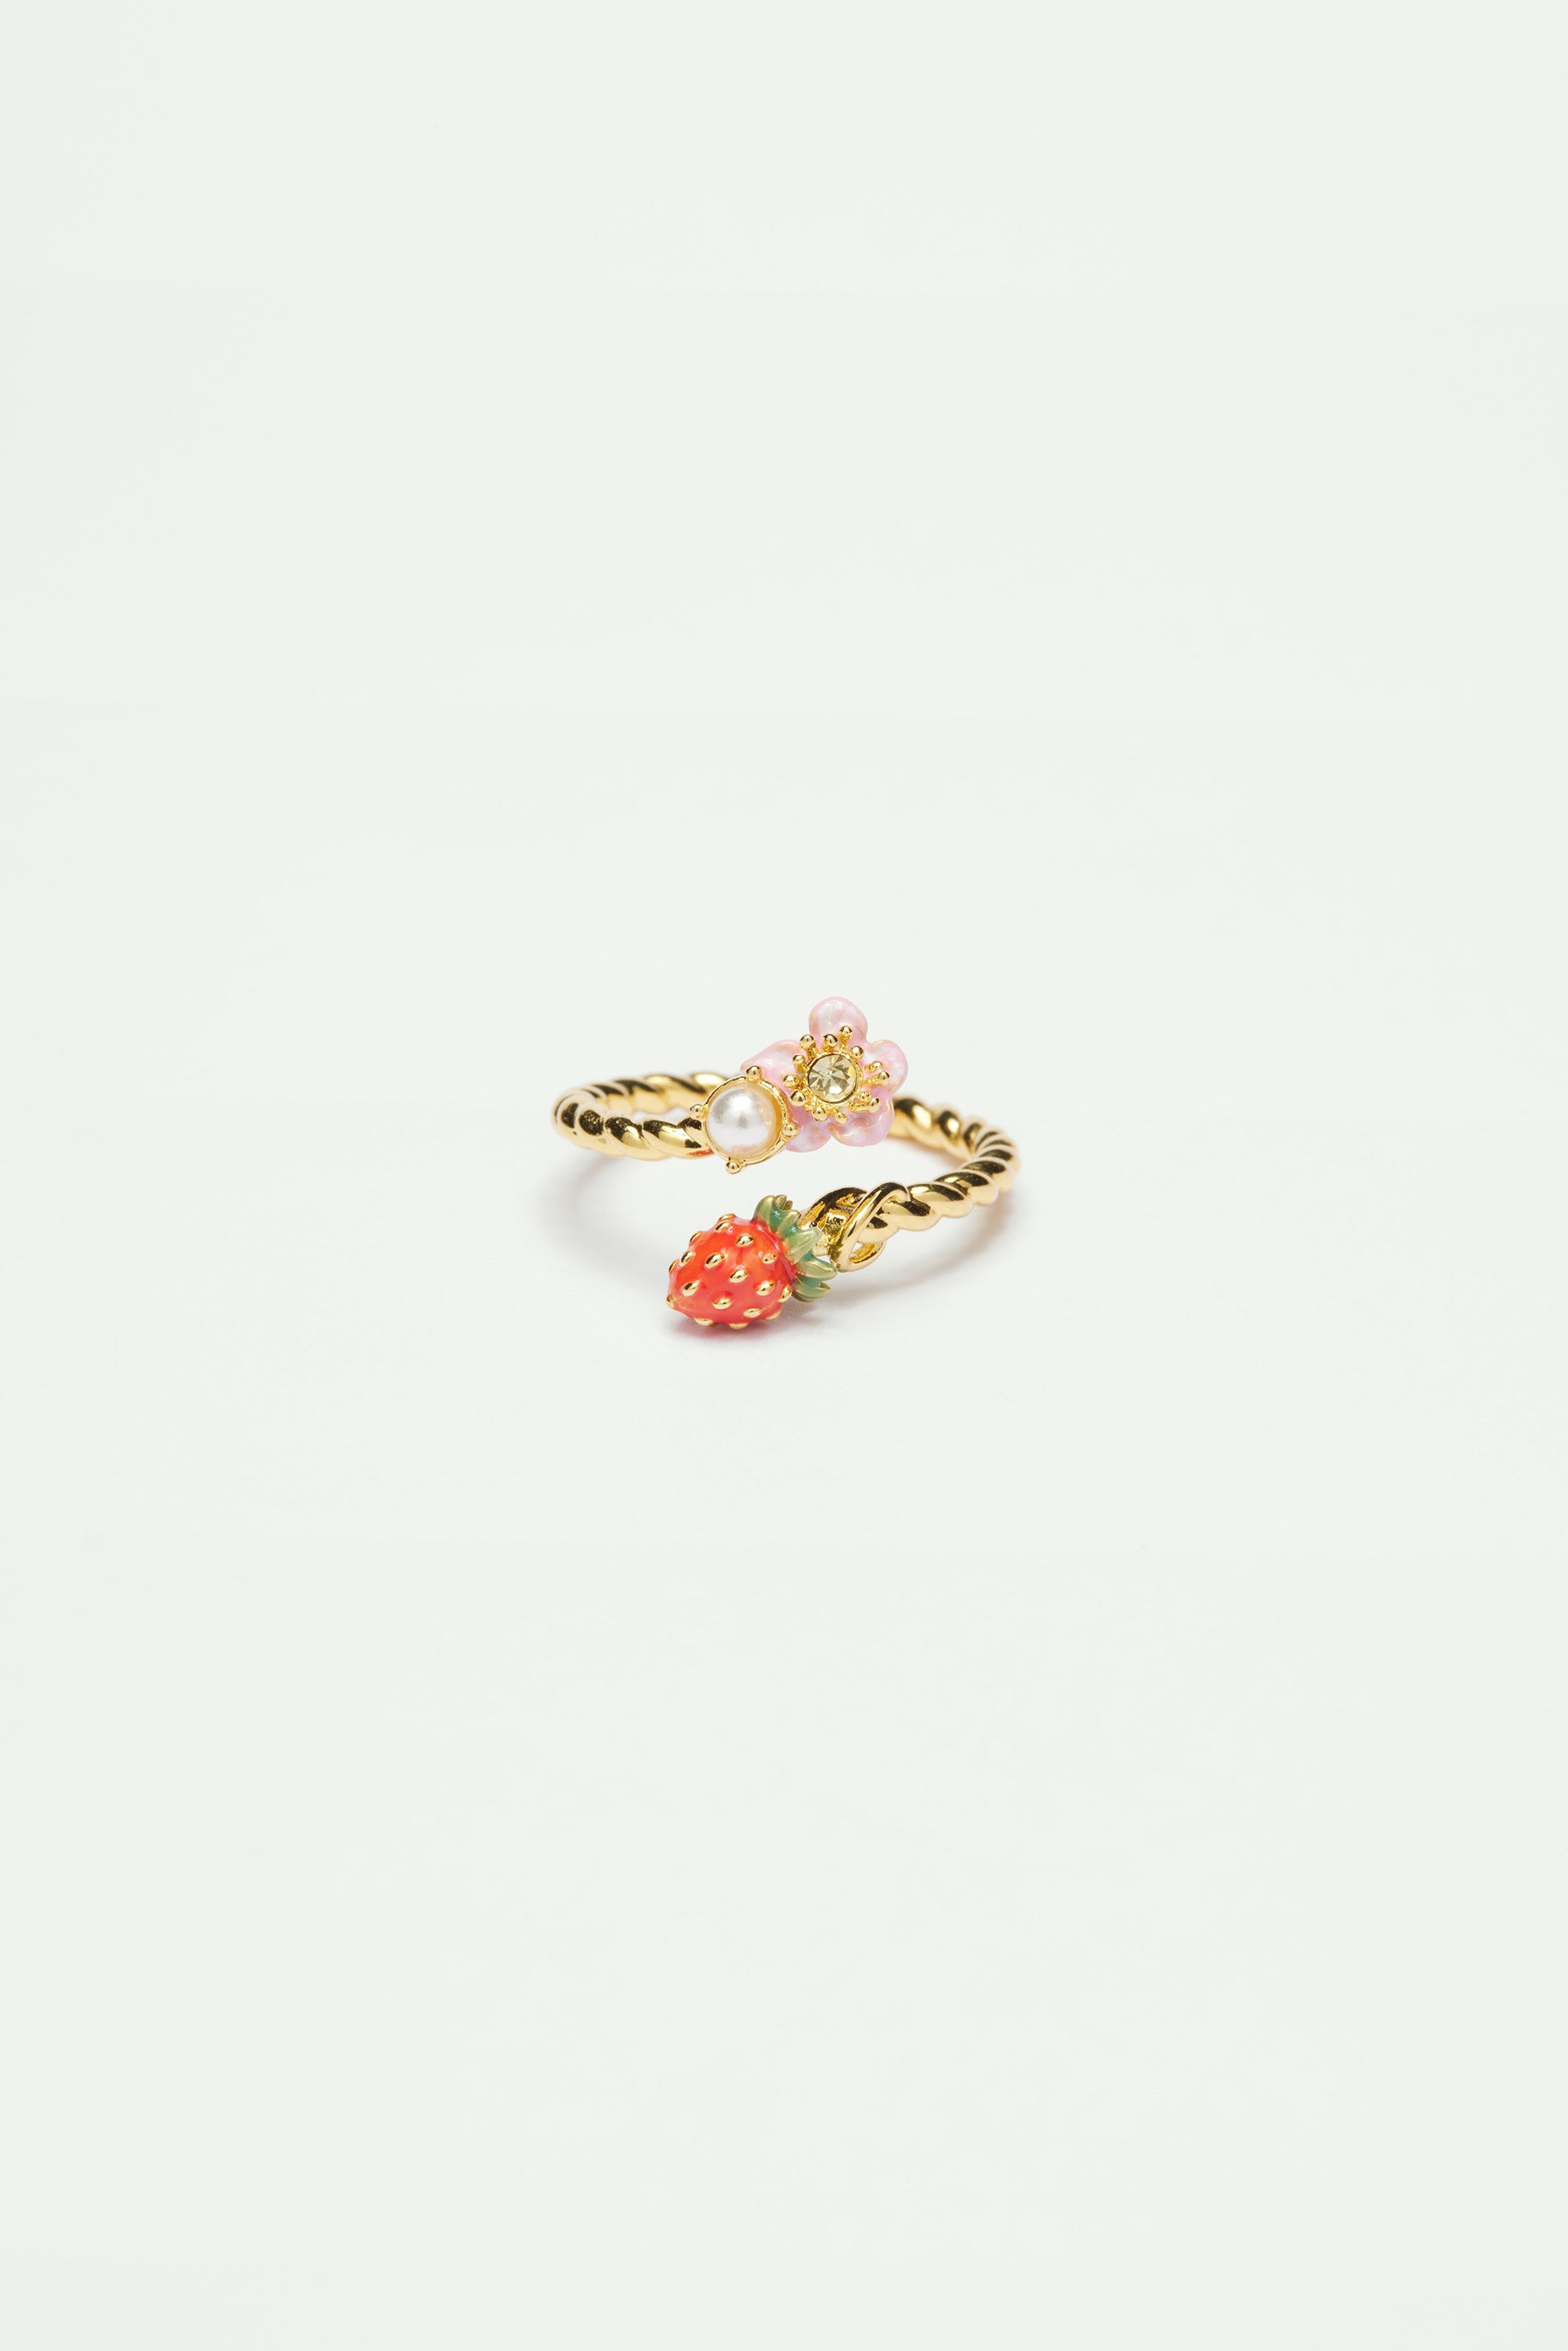 Wild strawberry and pink flower adjustable ring